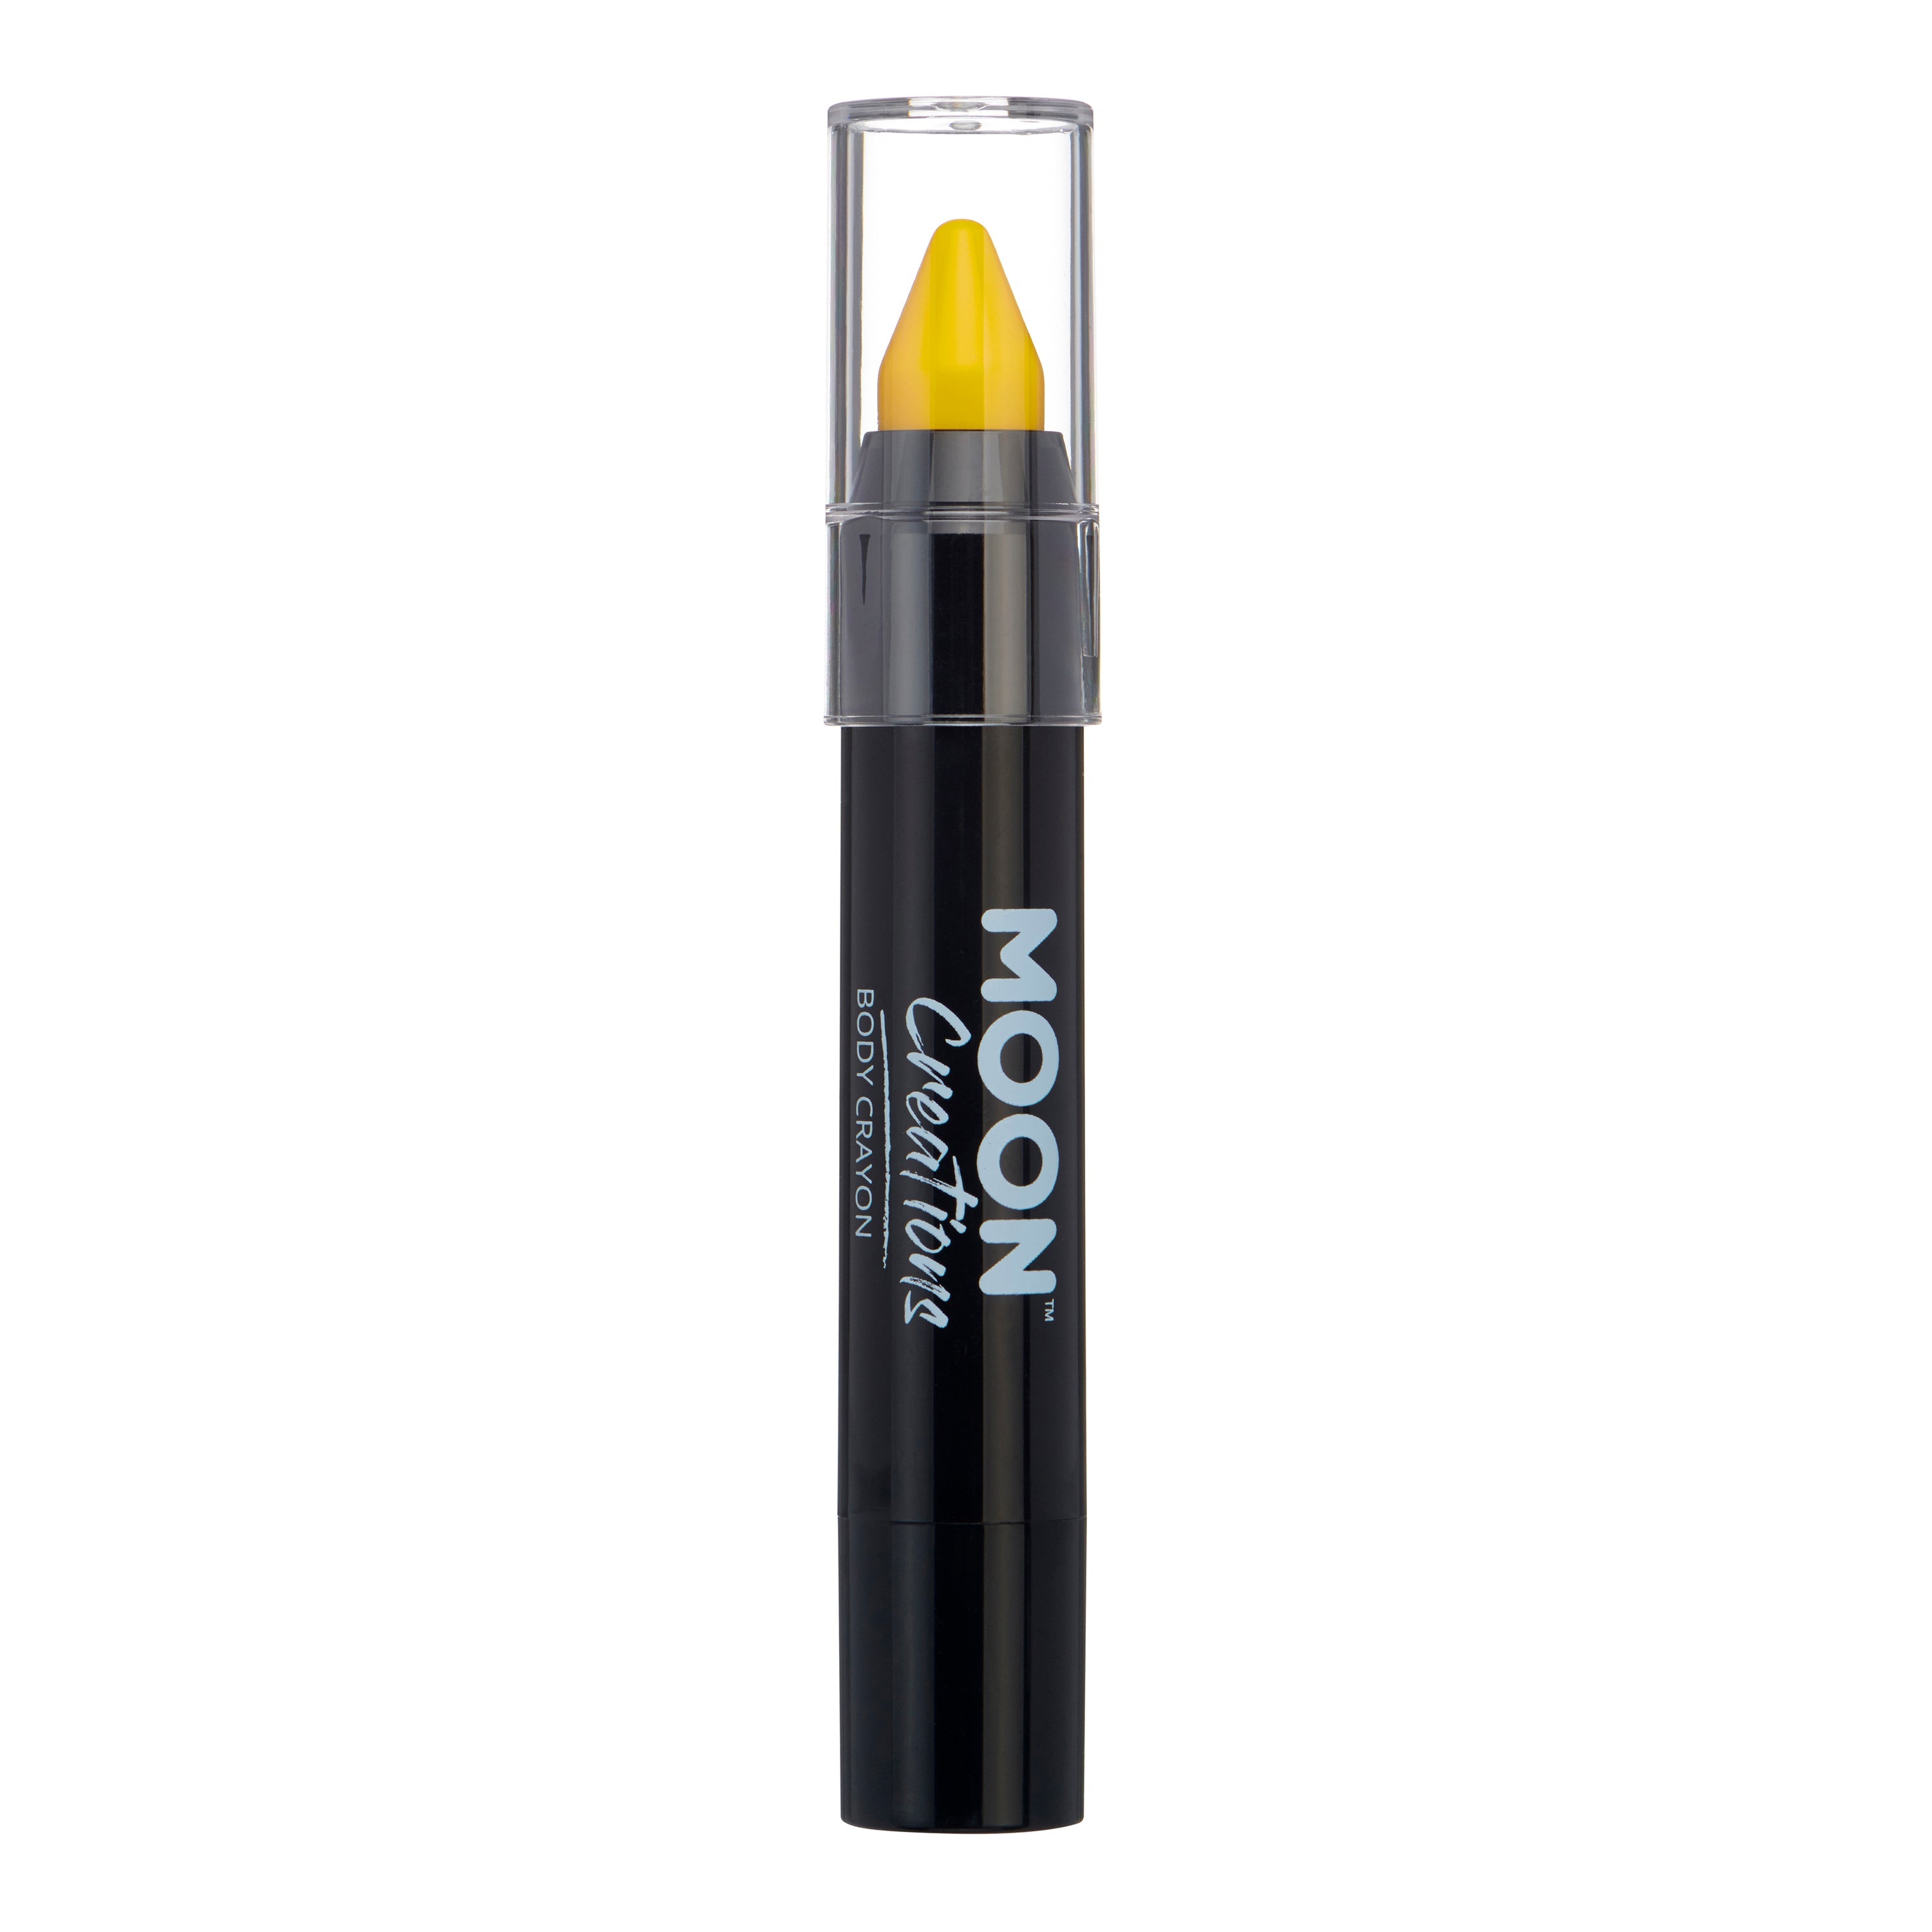 Yellow - Face & Body Crayon, 3.5g. Cosmetically certified, FDA & Health Canada compliant and cruelty free.